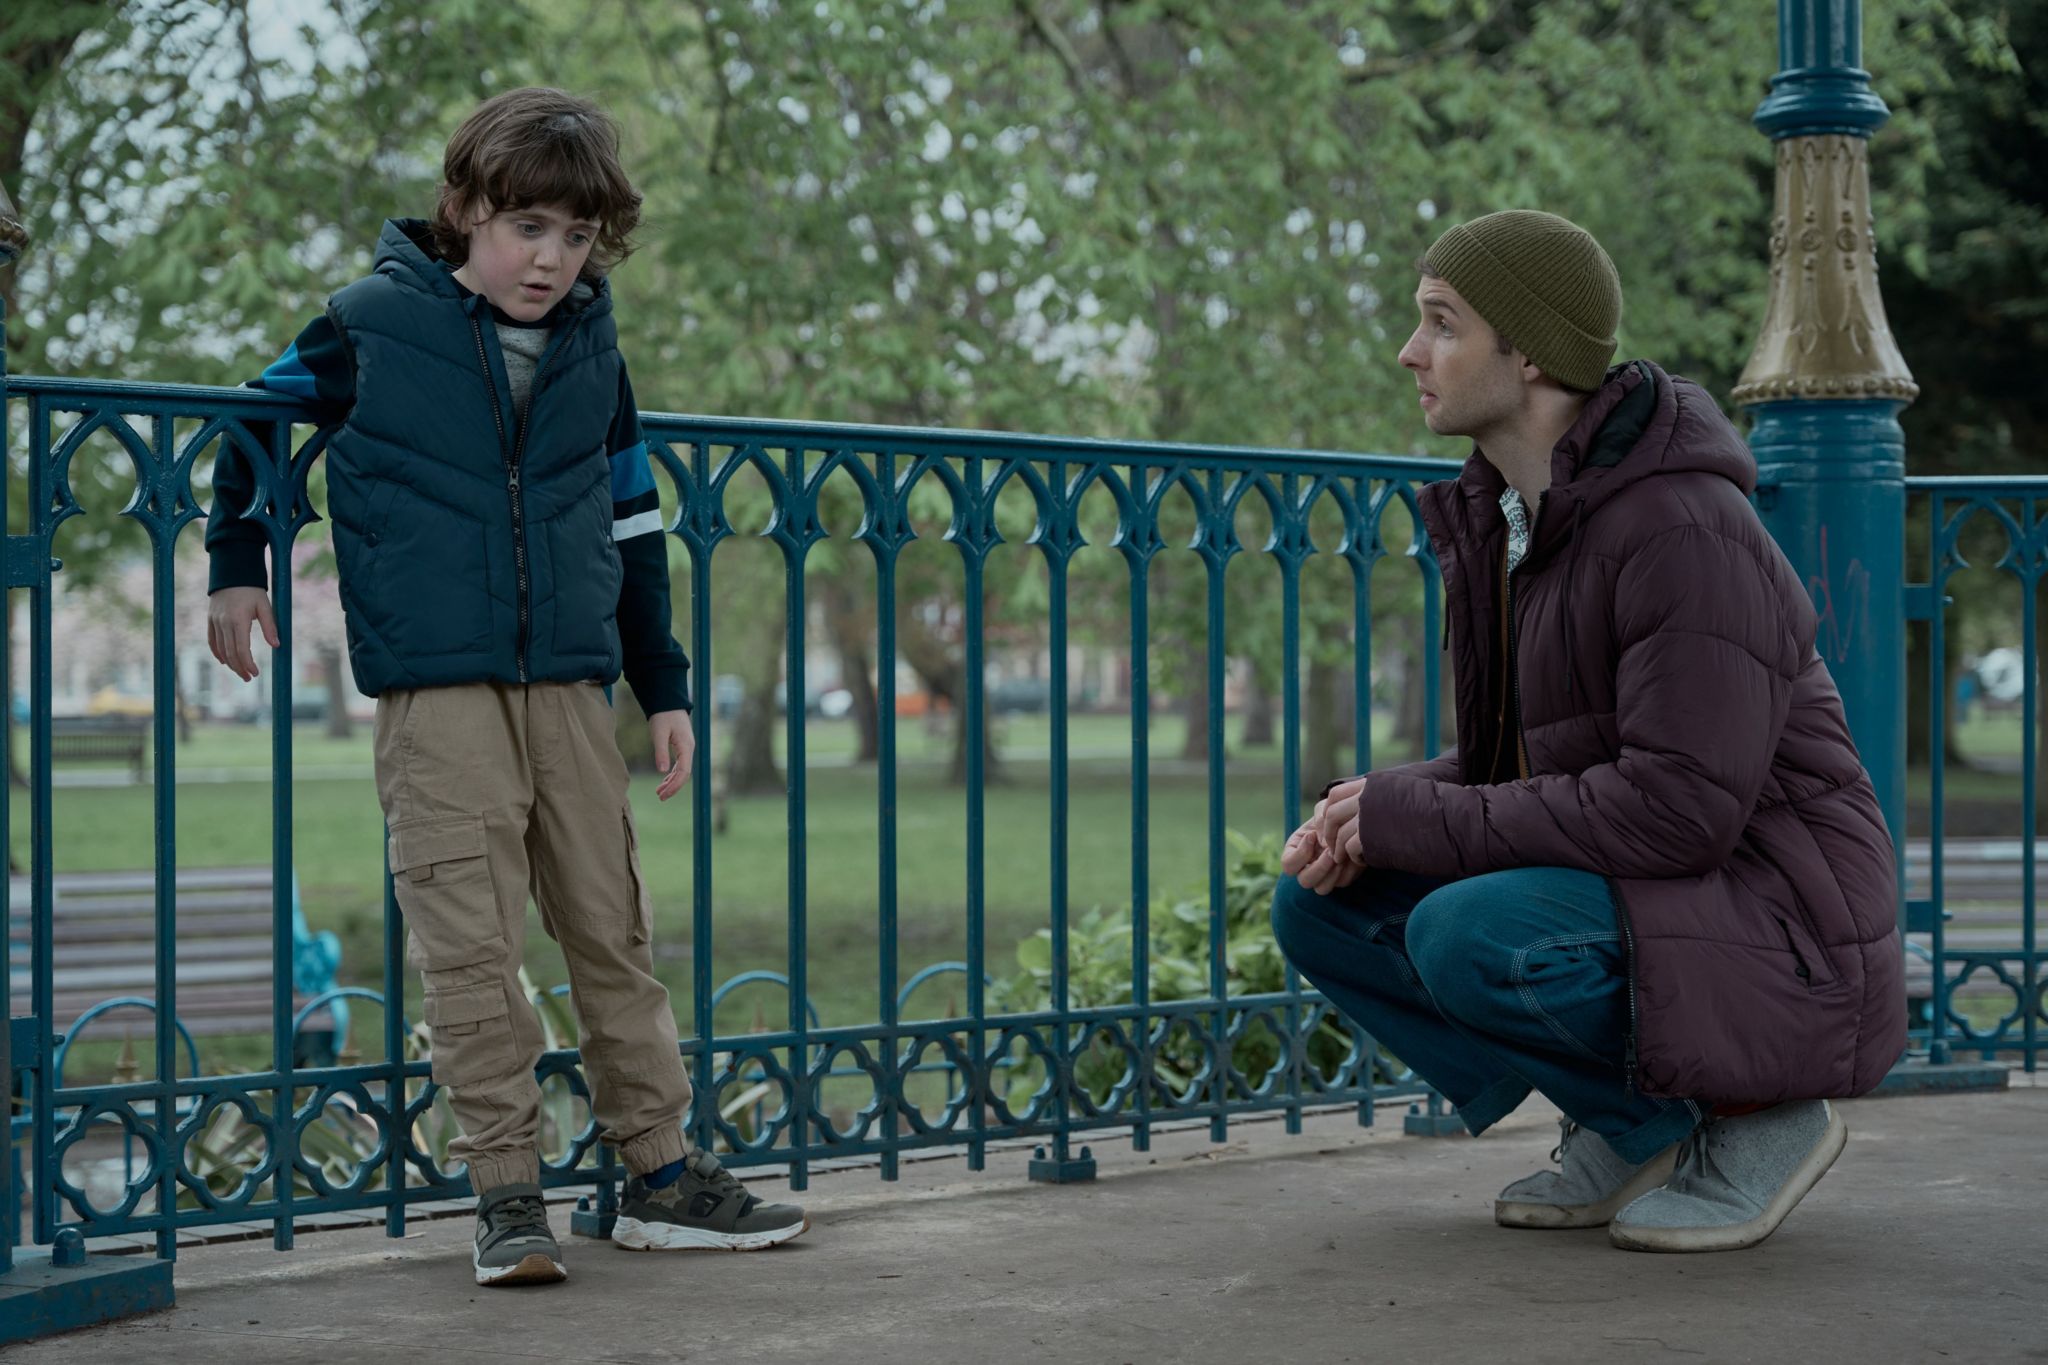 A young boy is leaning on a railing, as a man is bent down trying to speak with him.